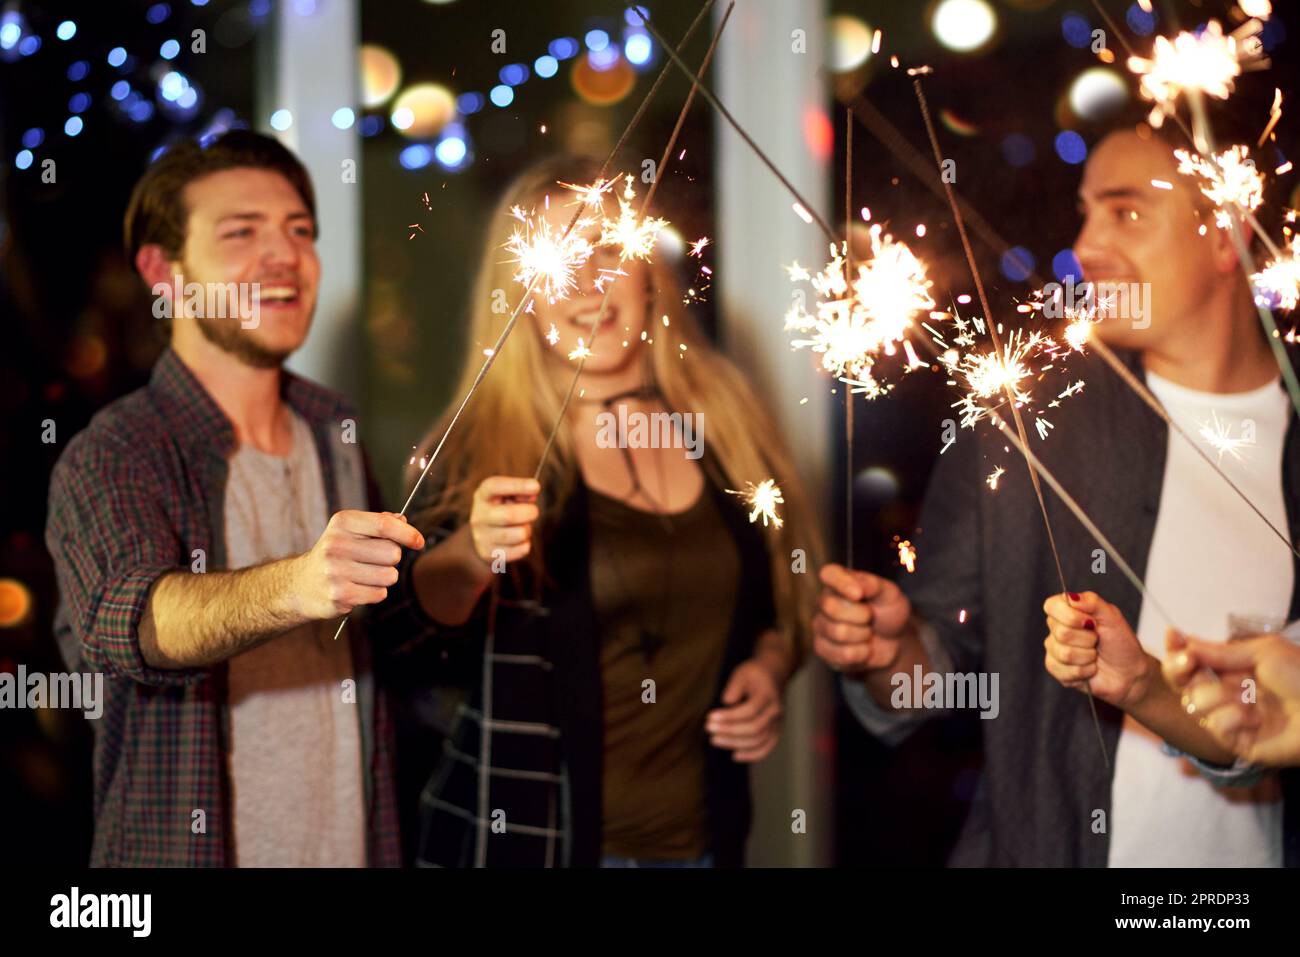 Adding some sparkle to the evening. a group of friends having fun at a nightclub. Stock Photo